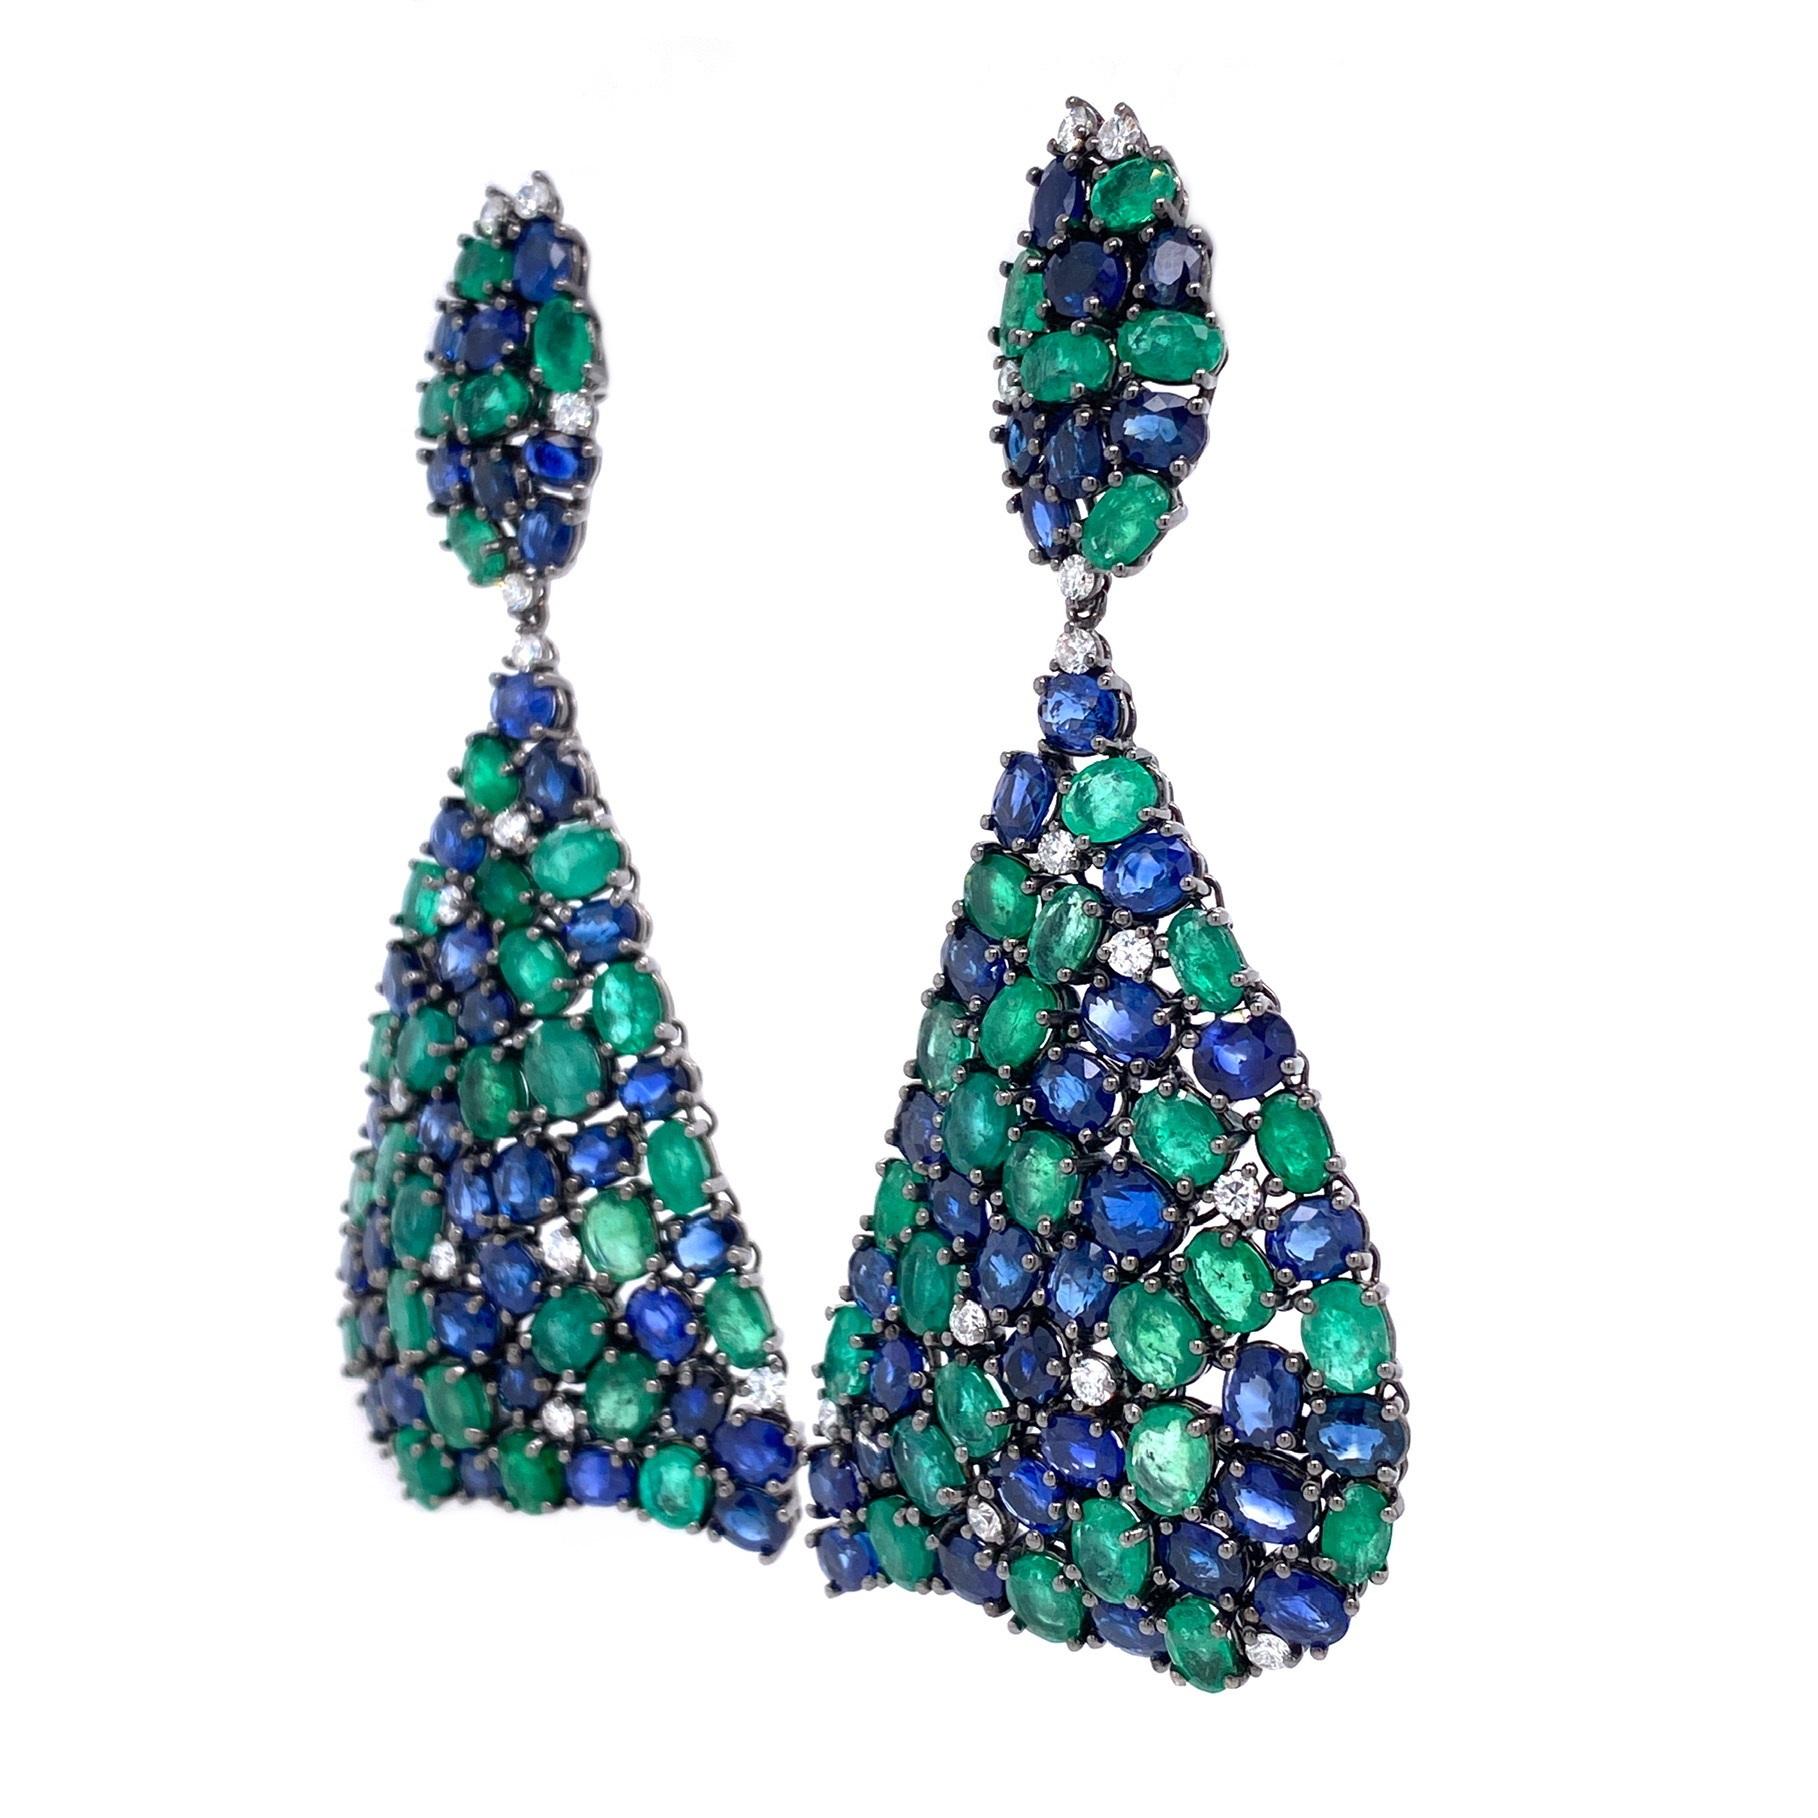 18K Black Rhodium Gold.
Emeralds: 17.42ct total weight.
Blue Sapphires: 22.30ct total weight.
Diamonds: 1.04ct total weight. 
All diamonds are G-H/SI stones.